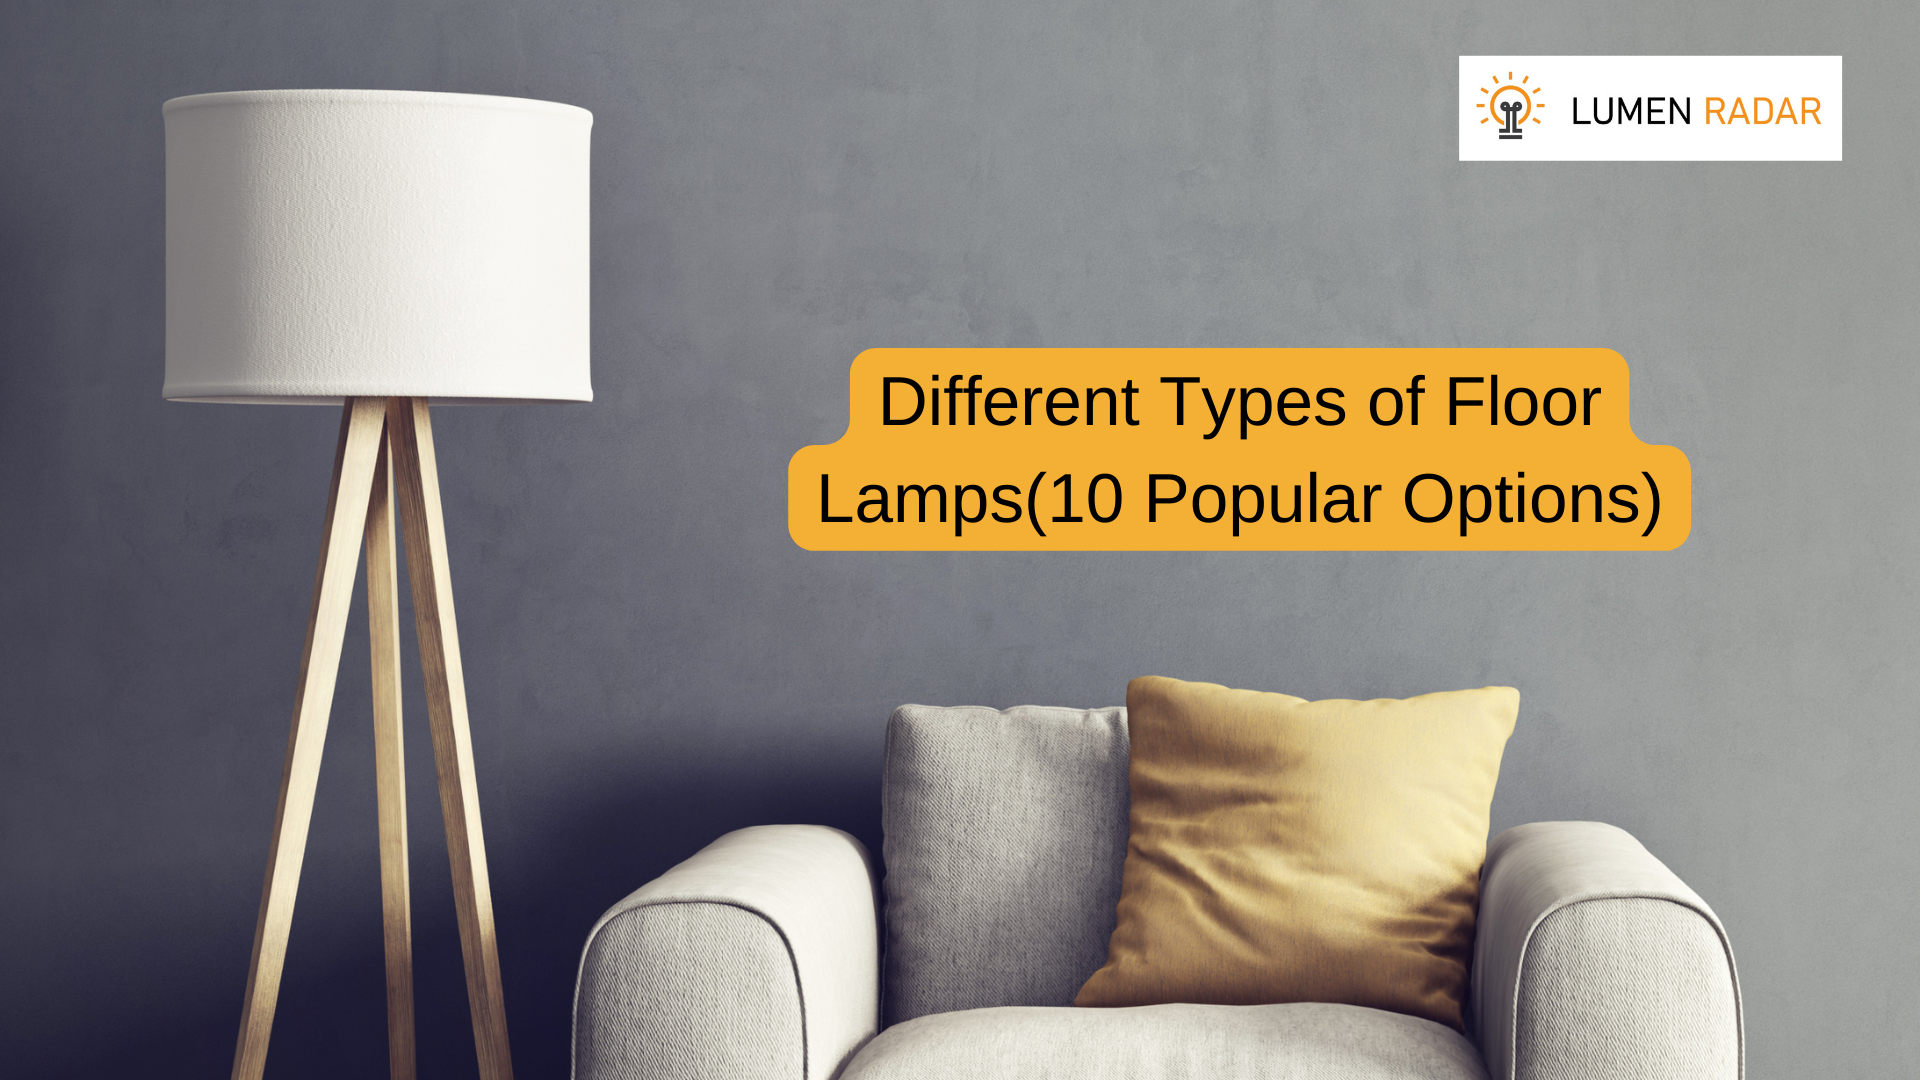 Different Types of Floor Lamps(10 Popular Options)